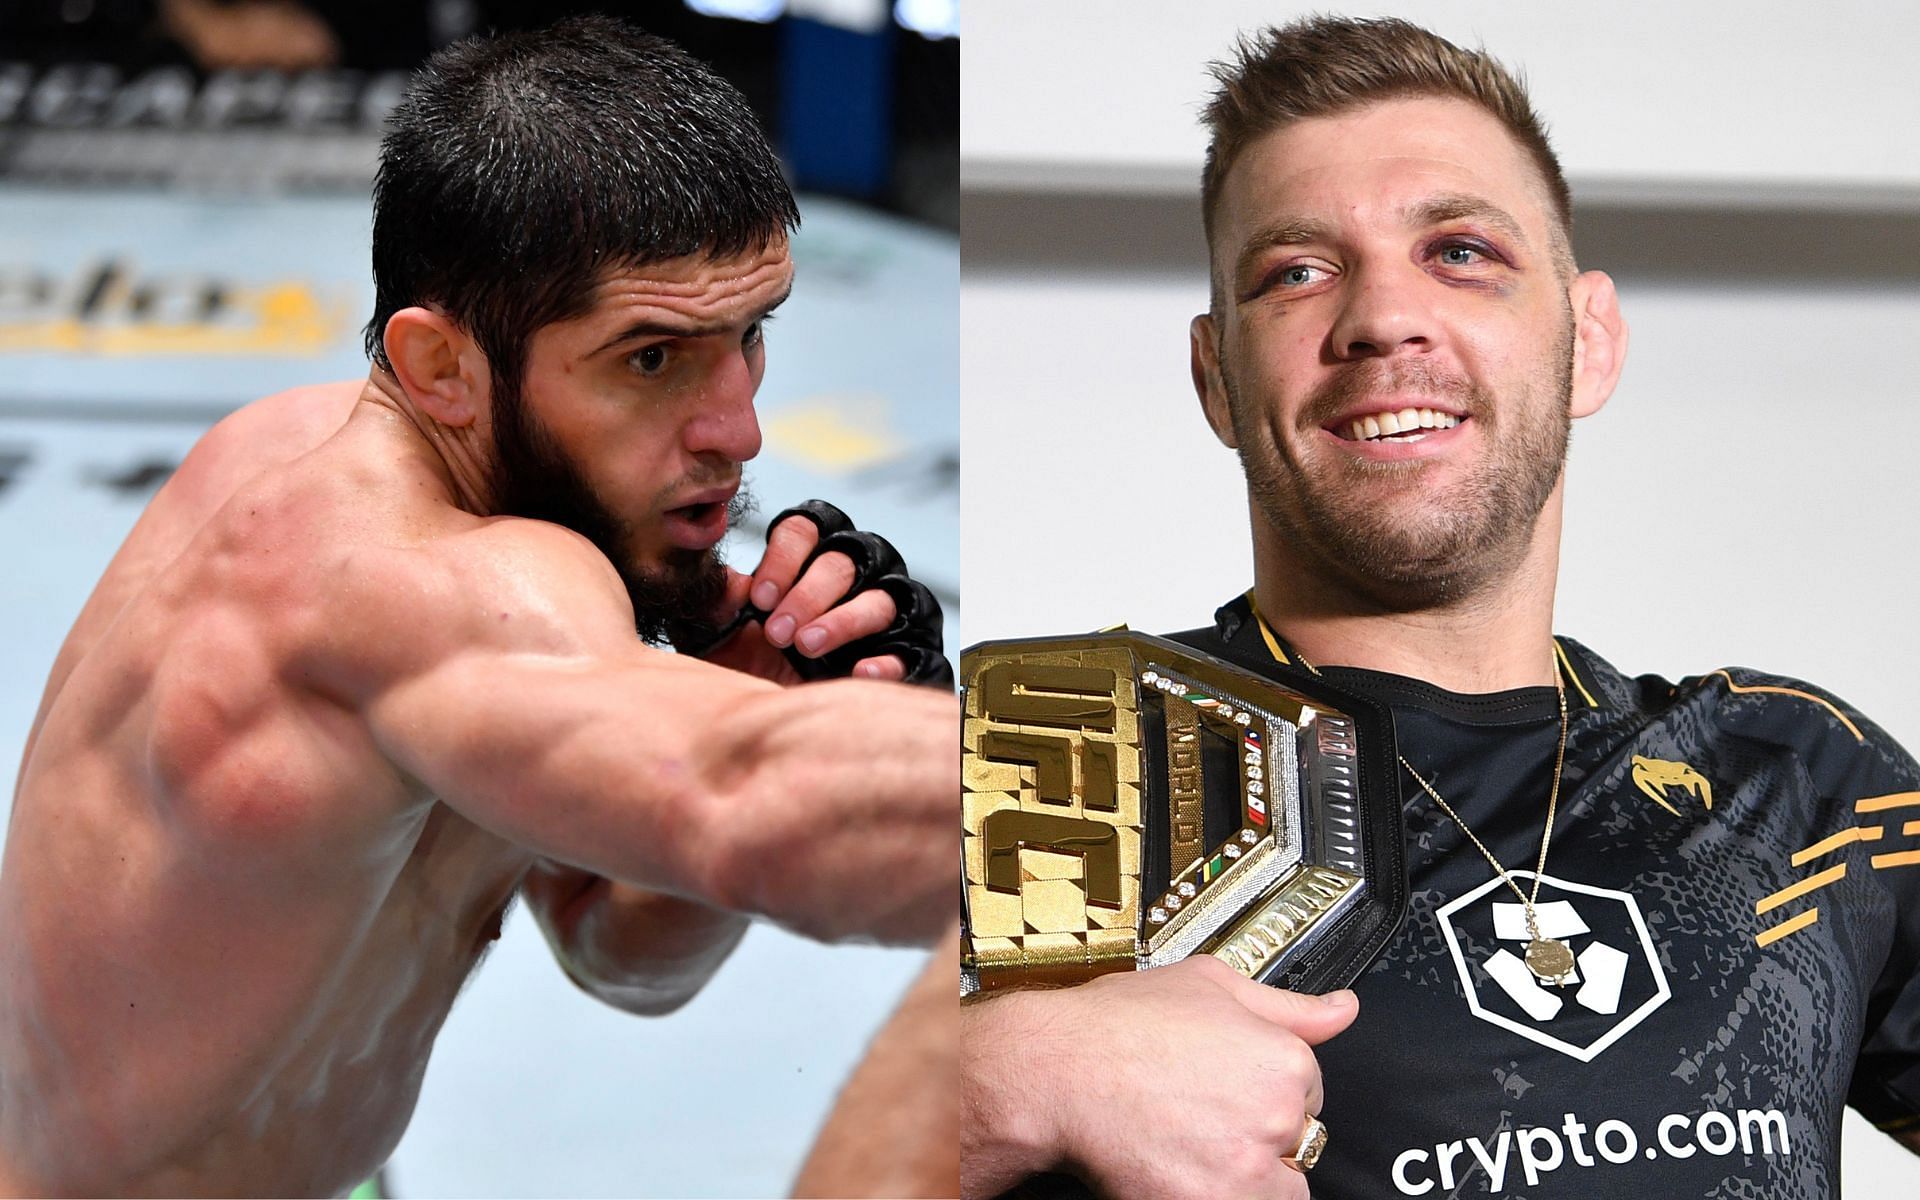 UFC lightweight champion Islam Makhachev (left) and UFC middleweight kingpin Dricus du Plessis (right) were among the stars rumored to compete on the UFC 300 card [Image courtesy: Getty Images]